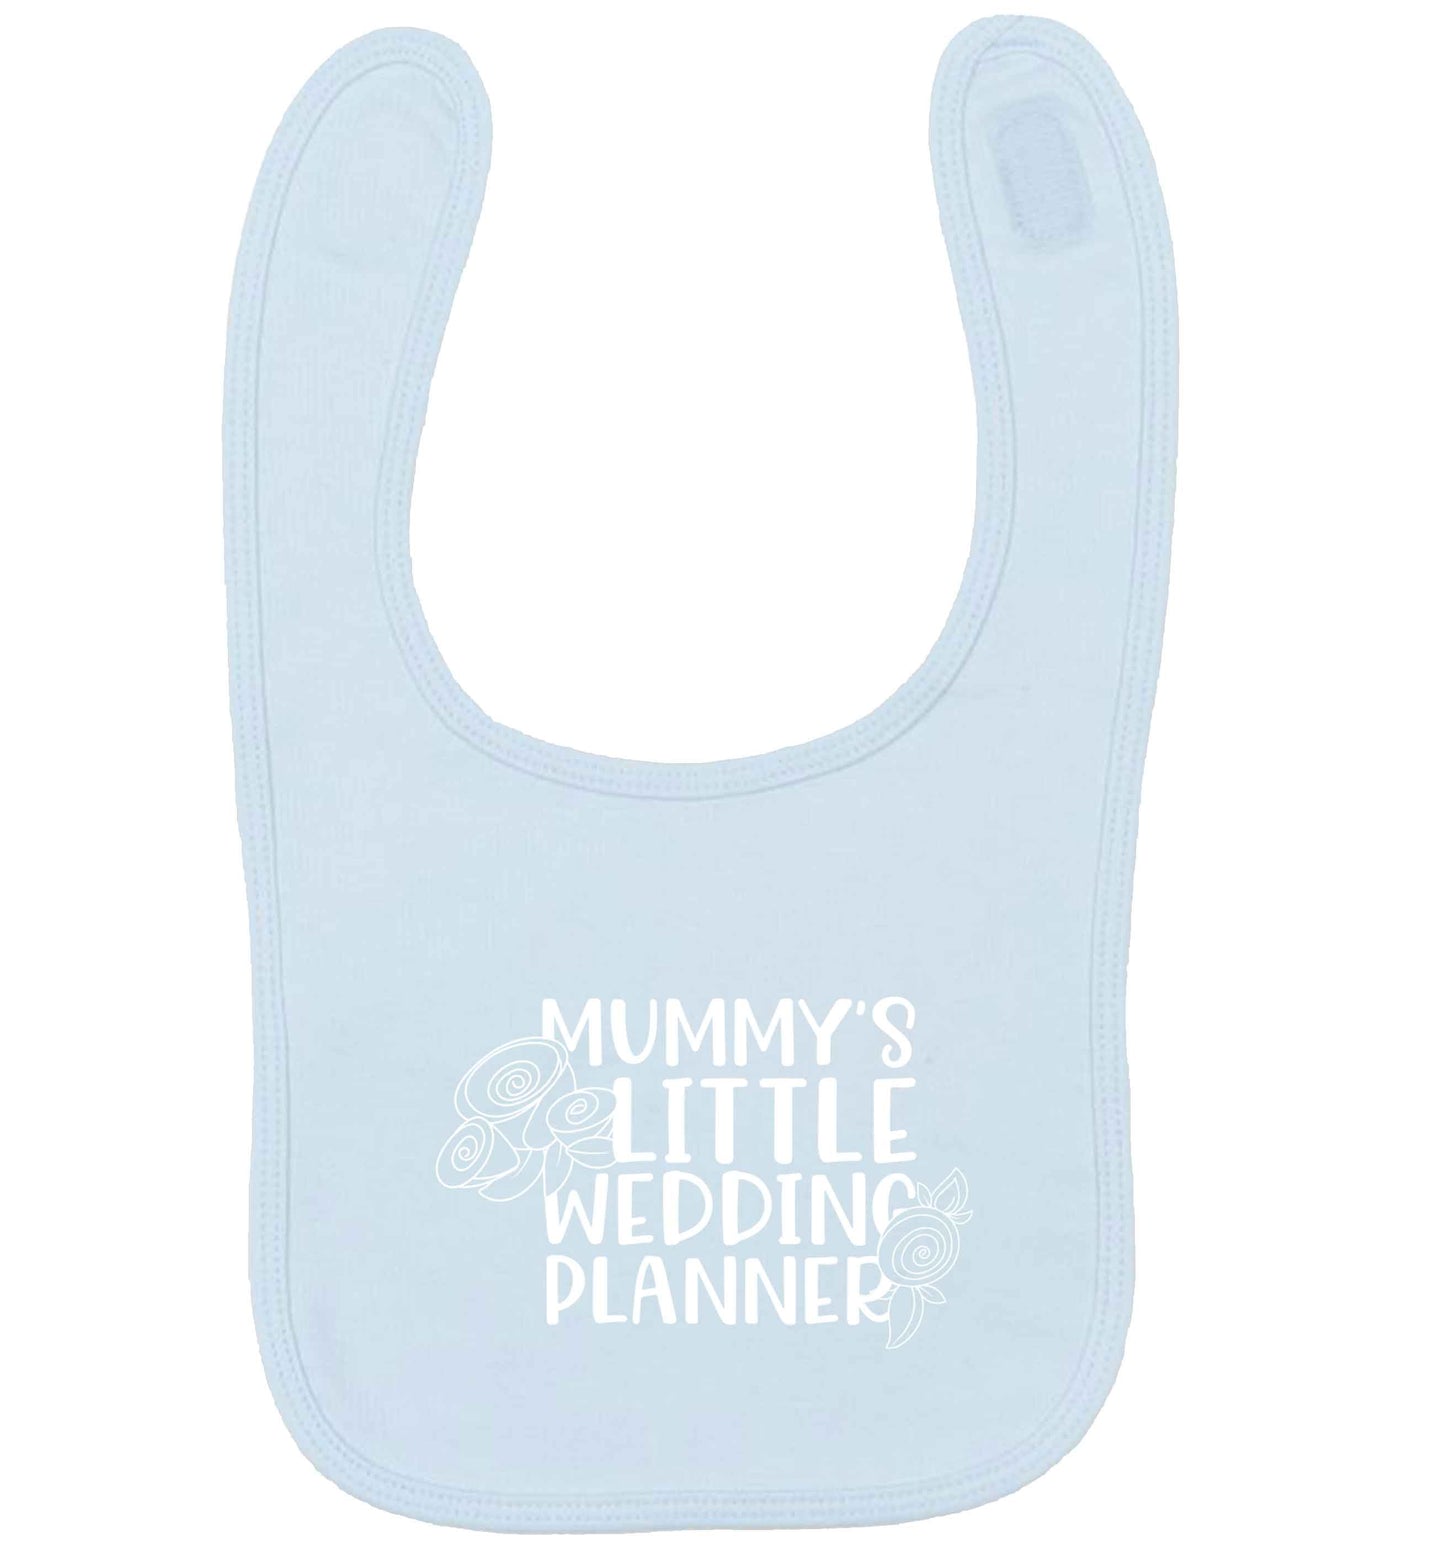 adorable wedding themed gifts for your mini wedding planner! pale blue baby bib